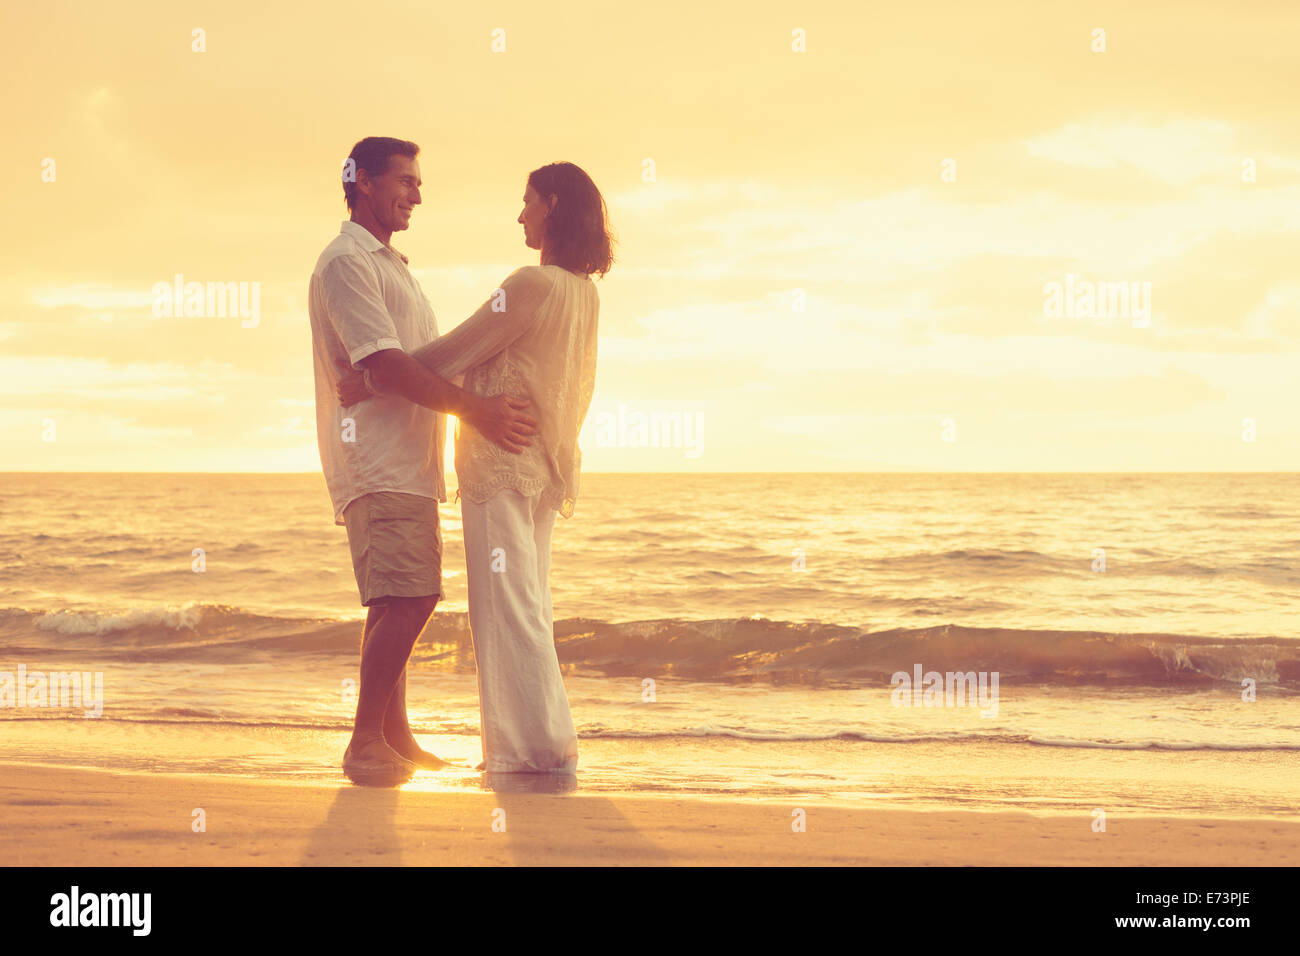 Romantic Retired Couple Relaxing on Beach Vacation at Sunset Stock Photo